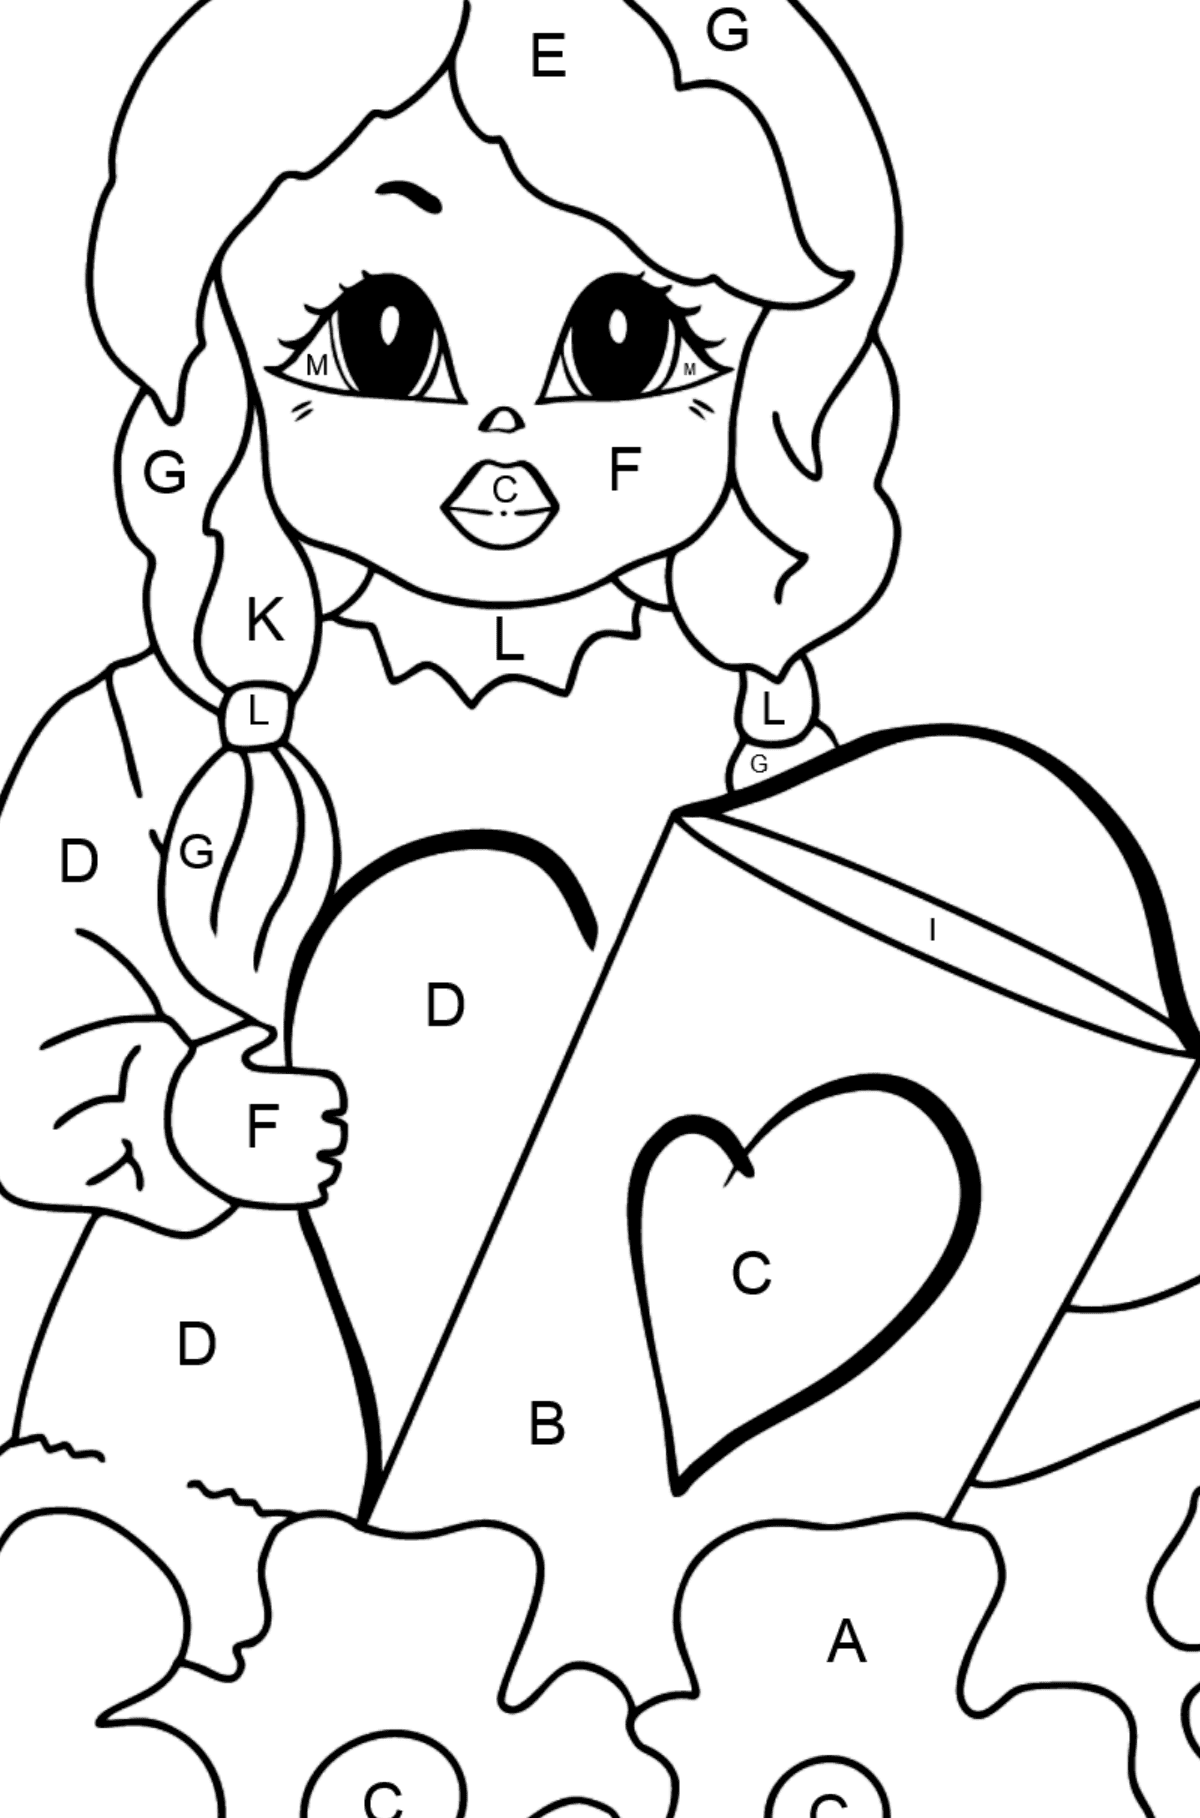 Coloring Page - A Princess with a Watering Can - Coloring by Letters for Kids